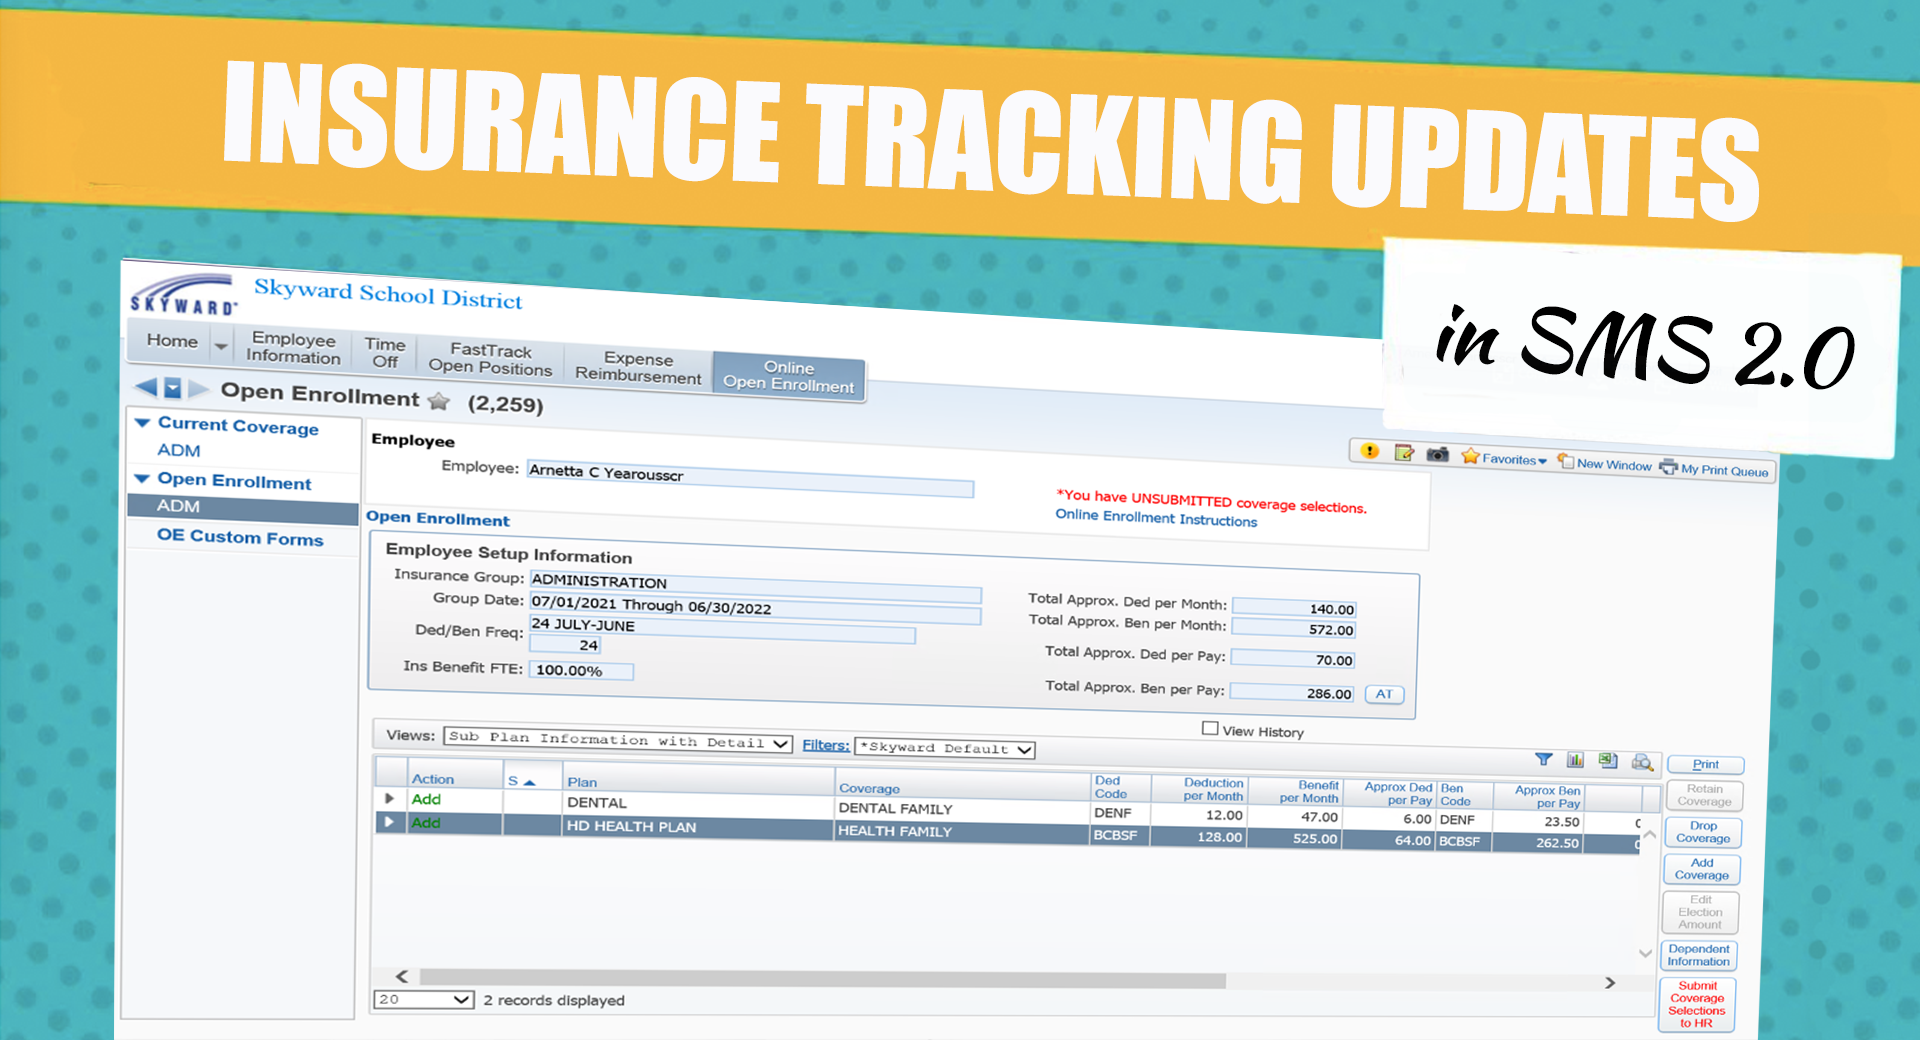 SMS 2.0 Updates: Insurance Tracking